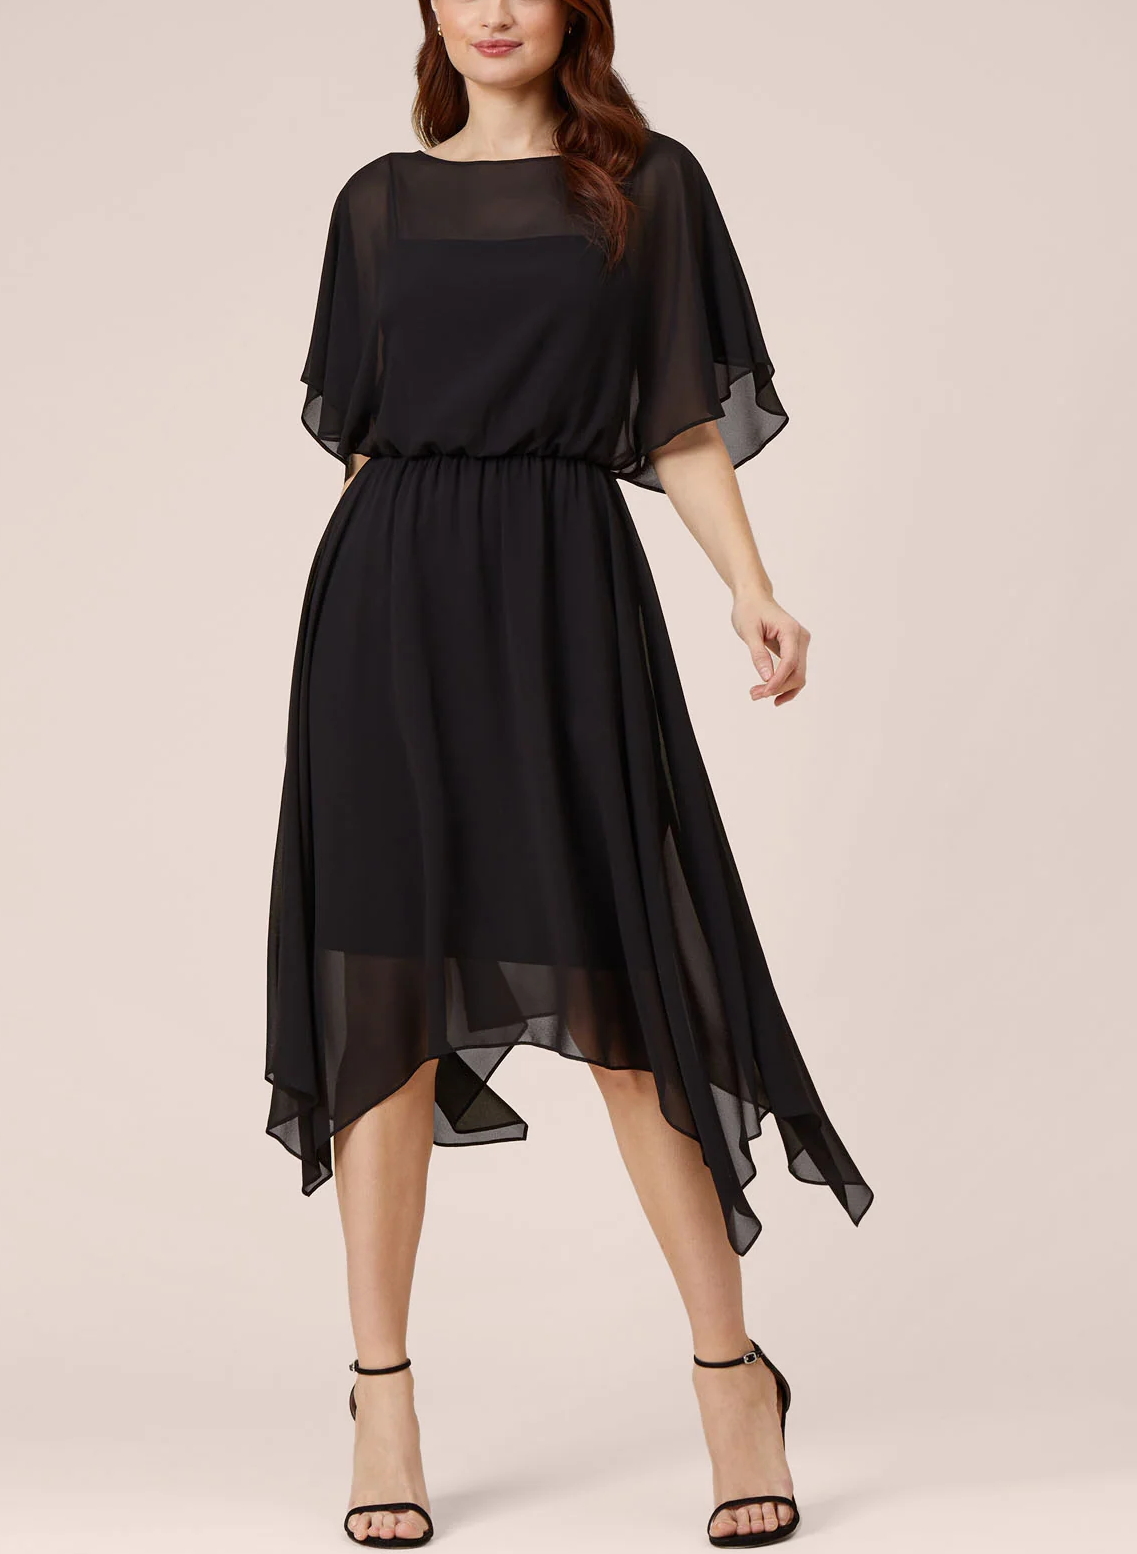 A-Line Square Neckline 1/2 Sleeves Chiffon Bridesmaid Dresses With Ruffle